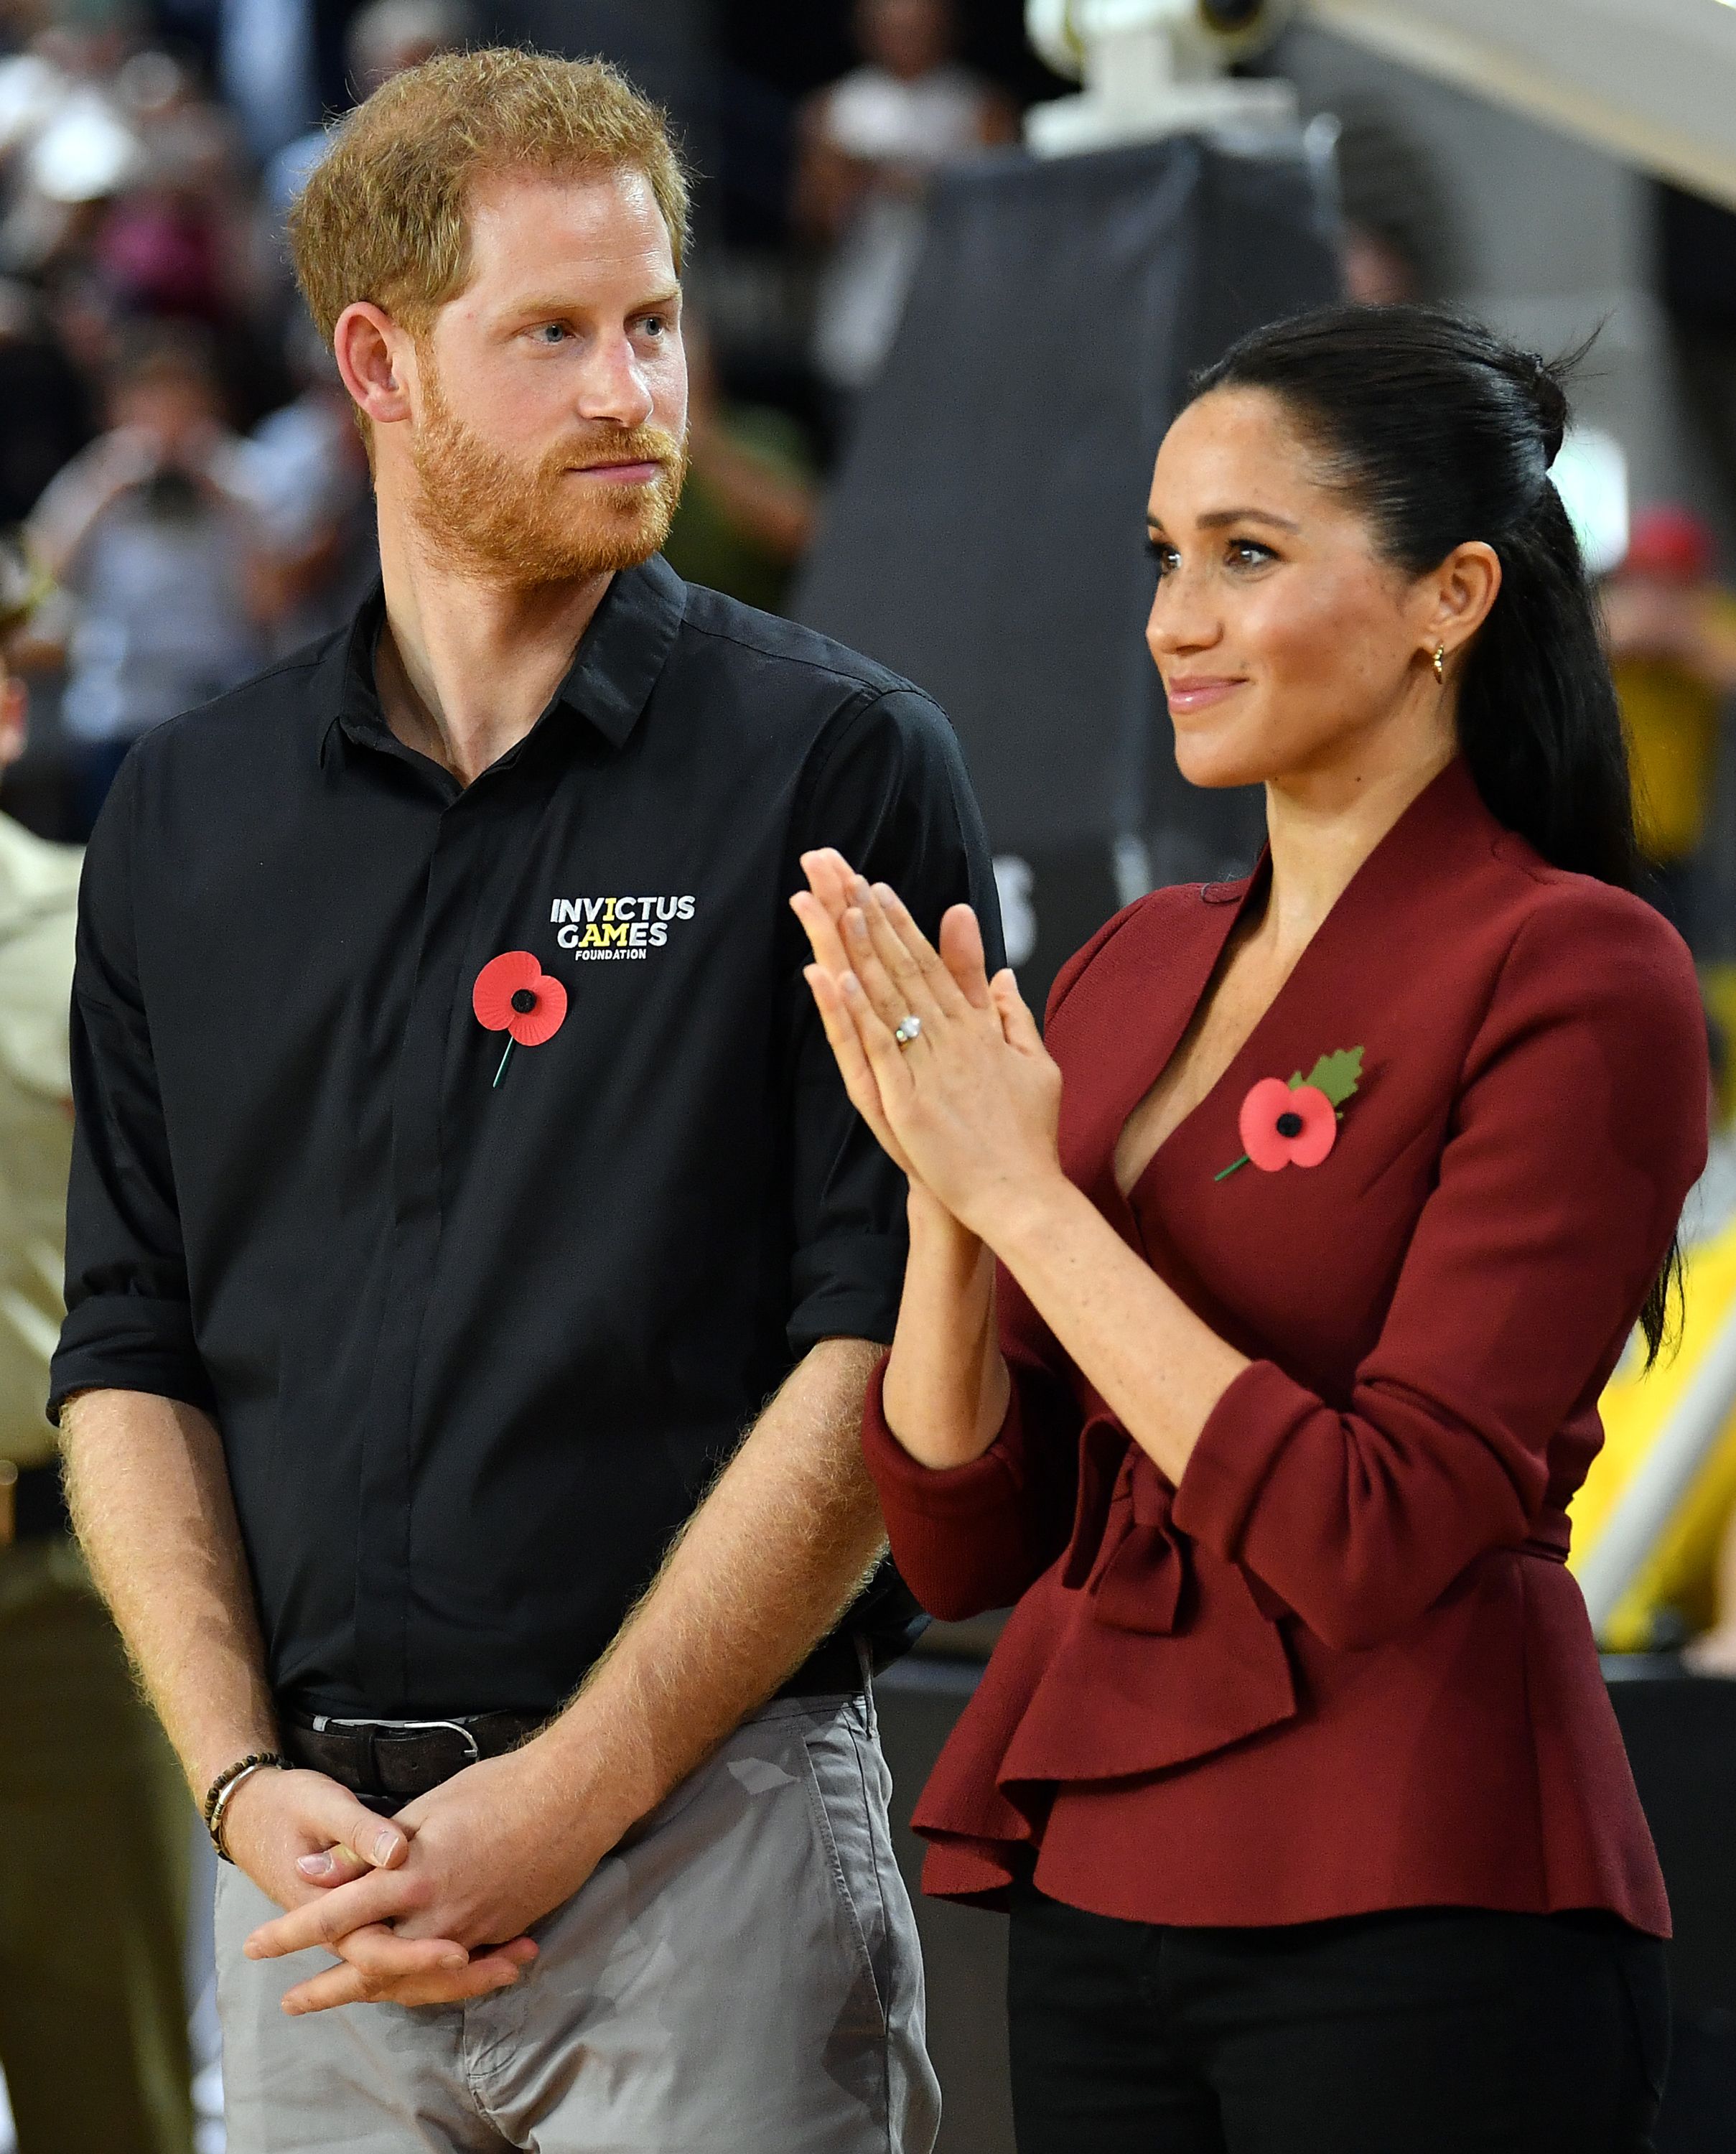 Prince Harry and Meghan Markle at the Invictus Games in Sydney, Australia on October 27, 2018 | Source: Getty Images